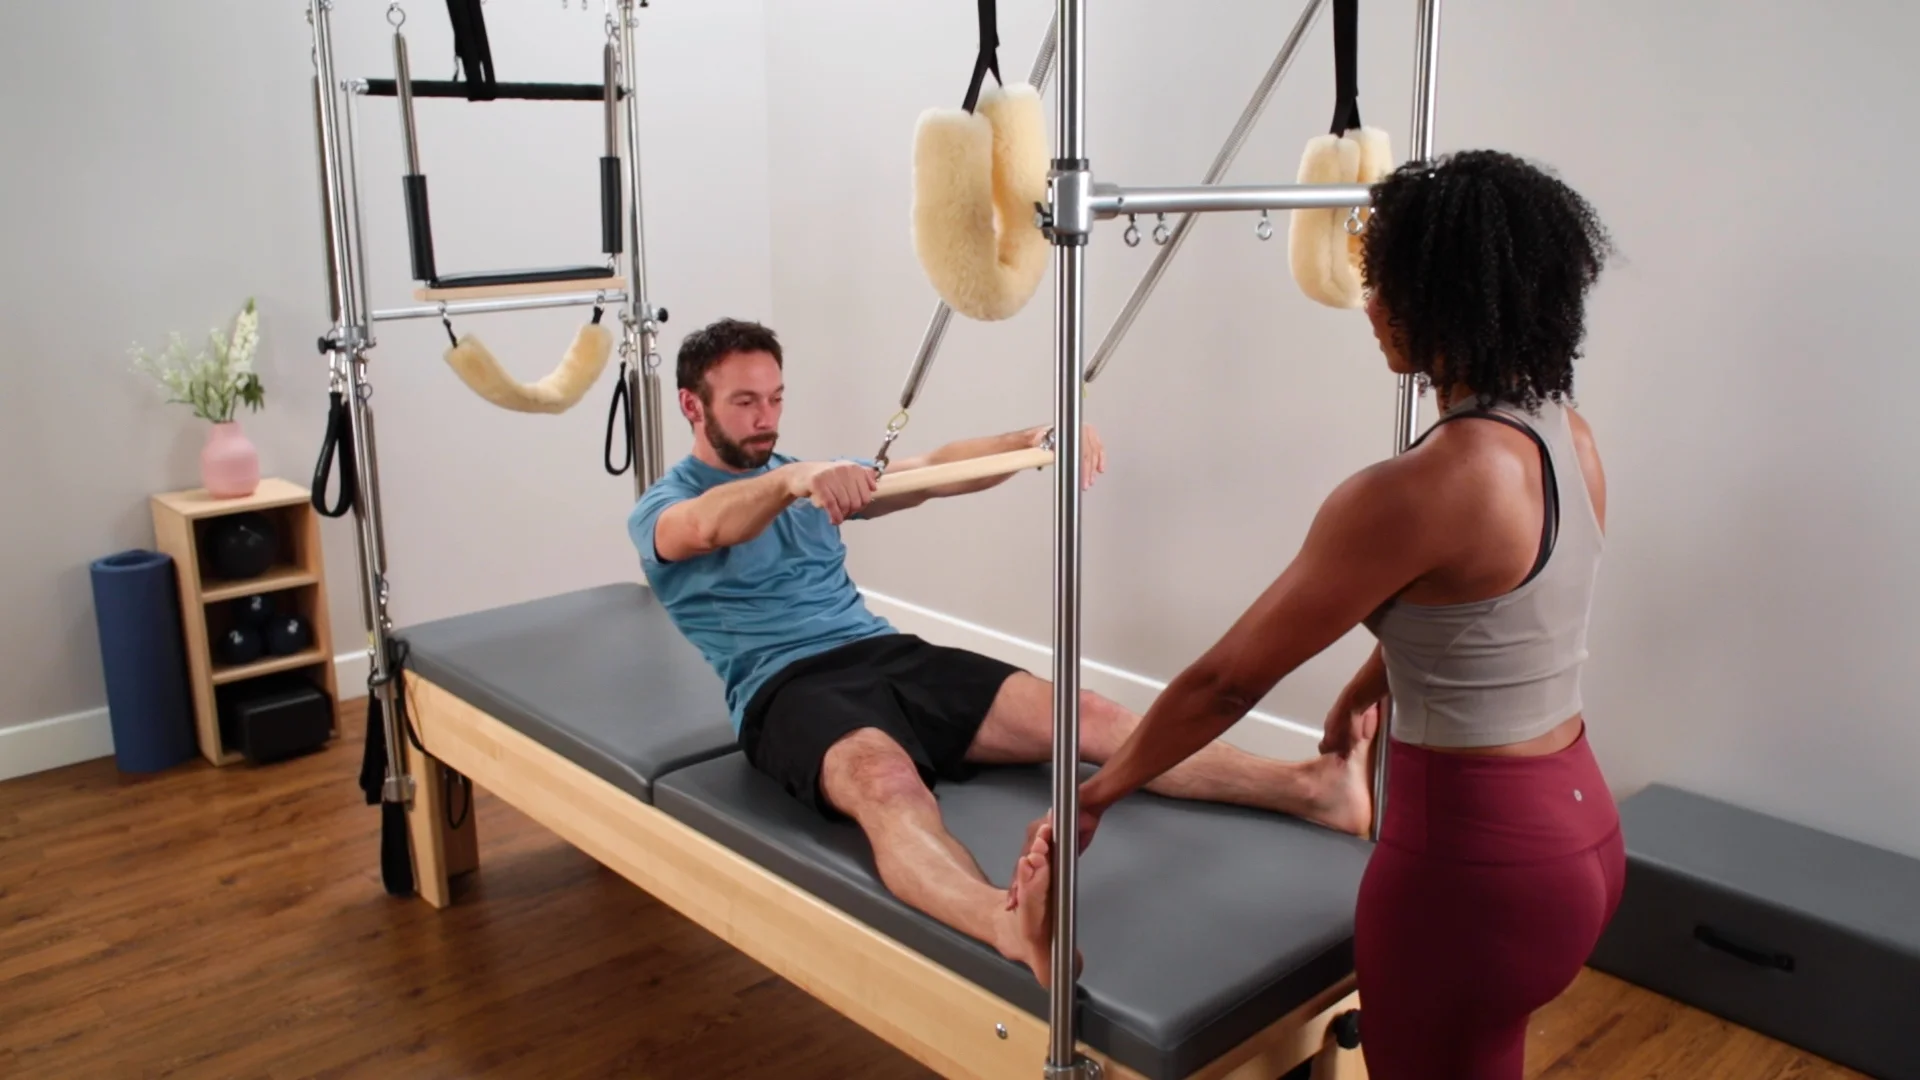 Pilates Rialto Reformer™ with Tower